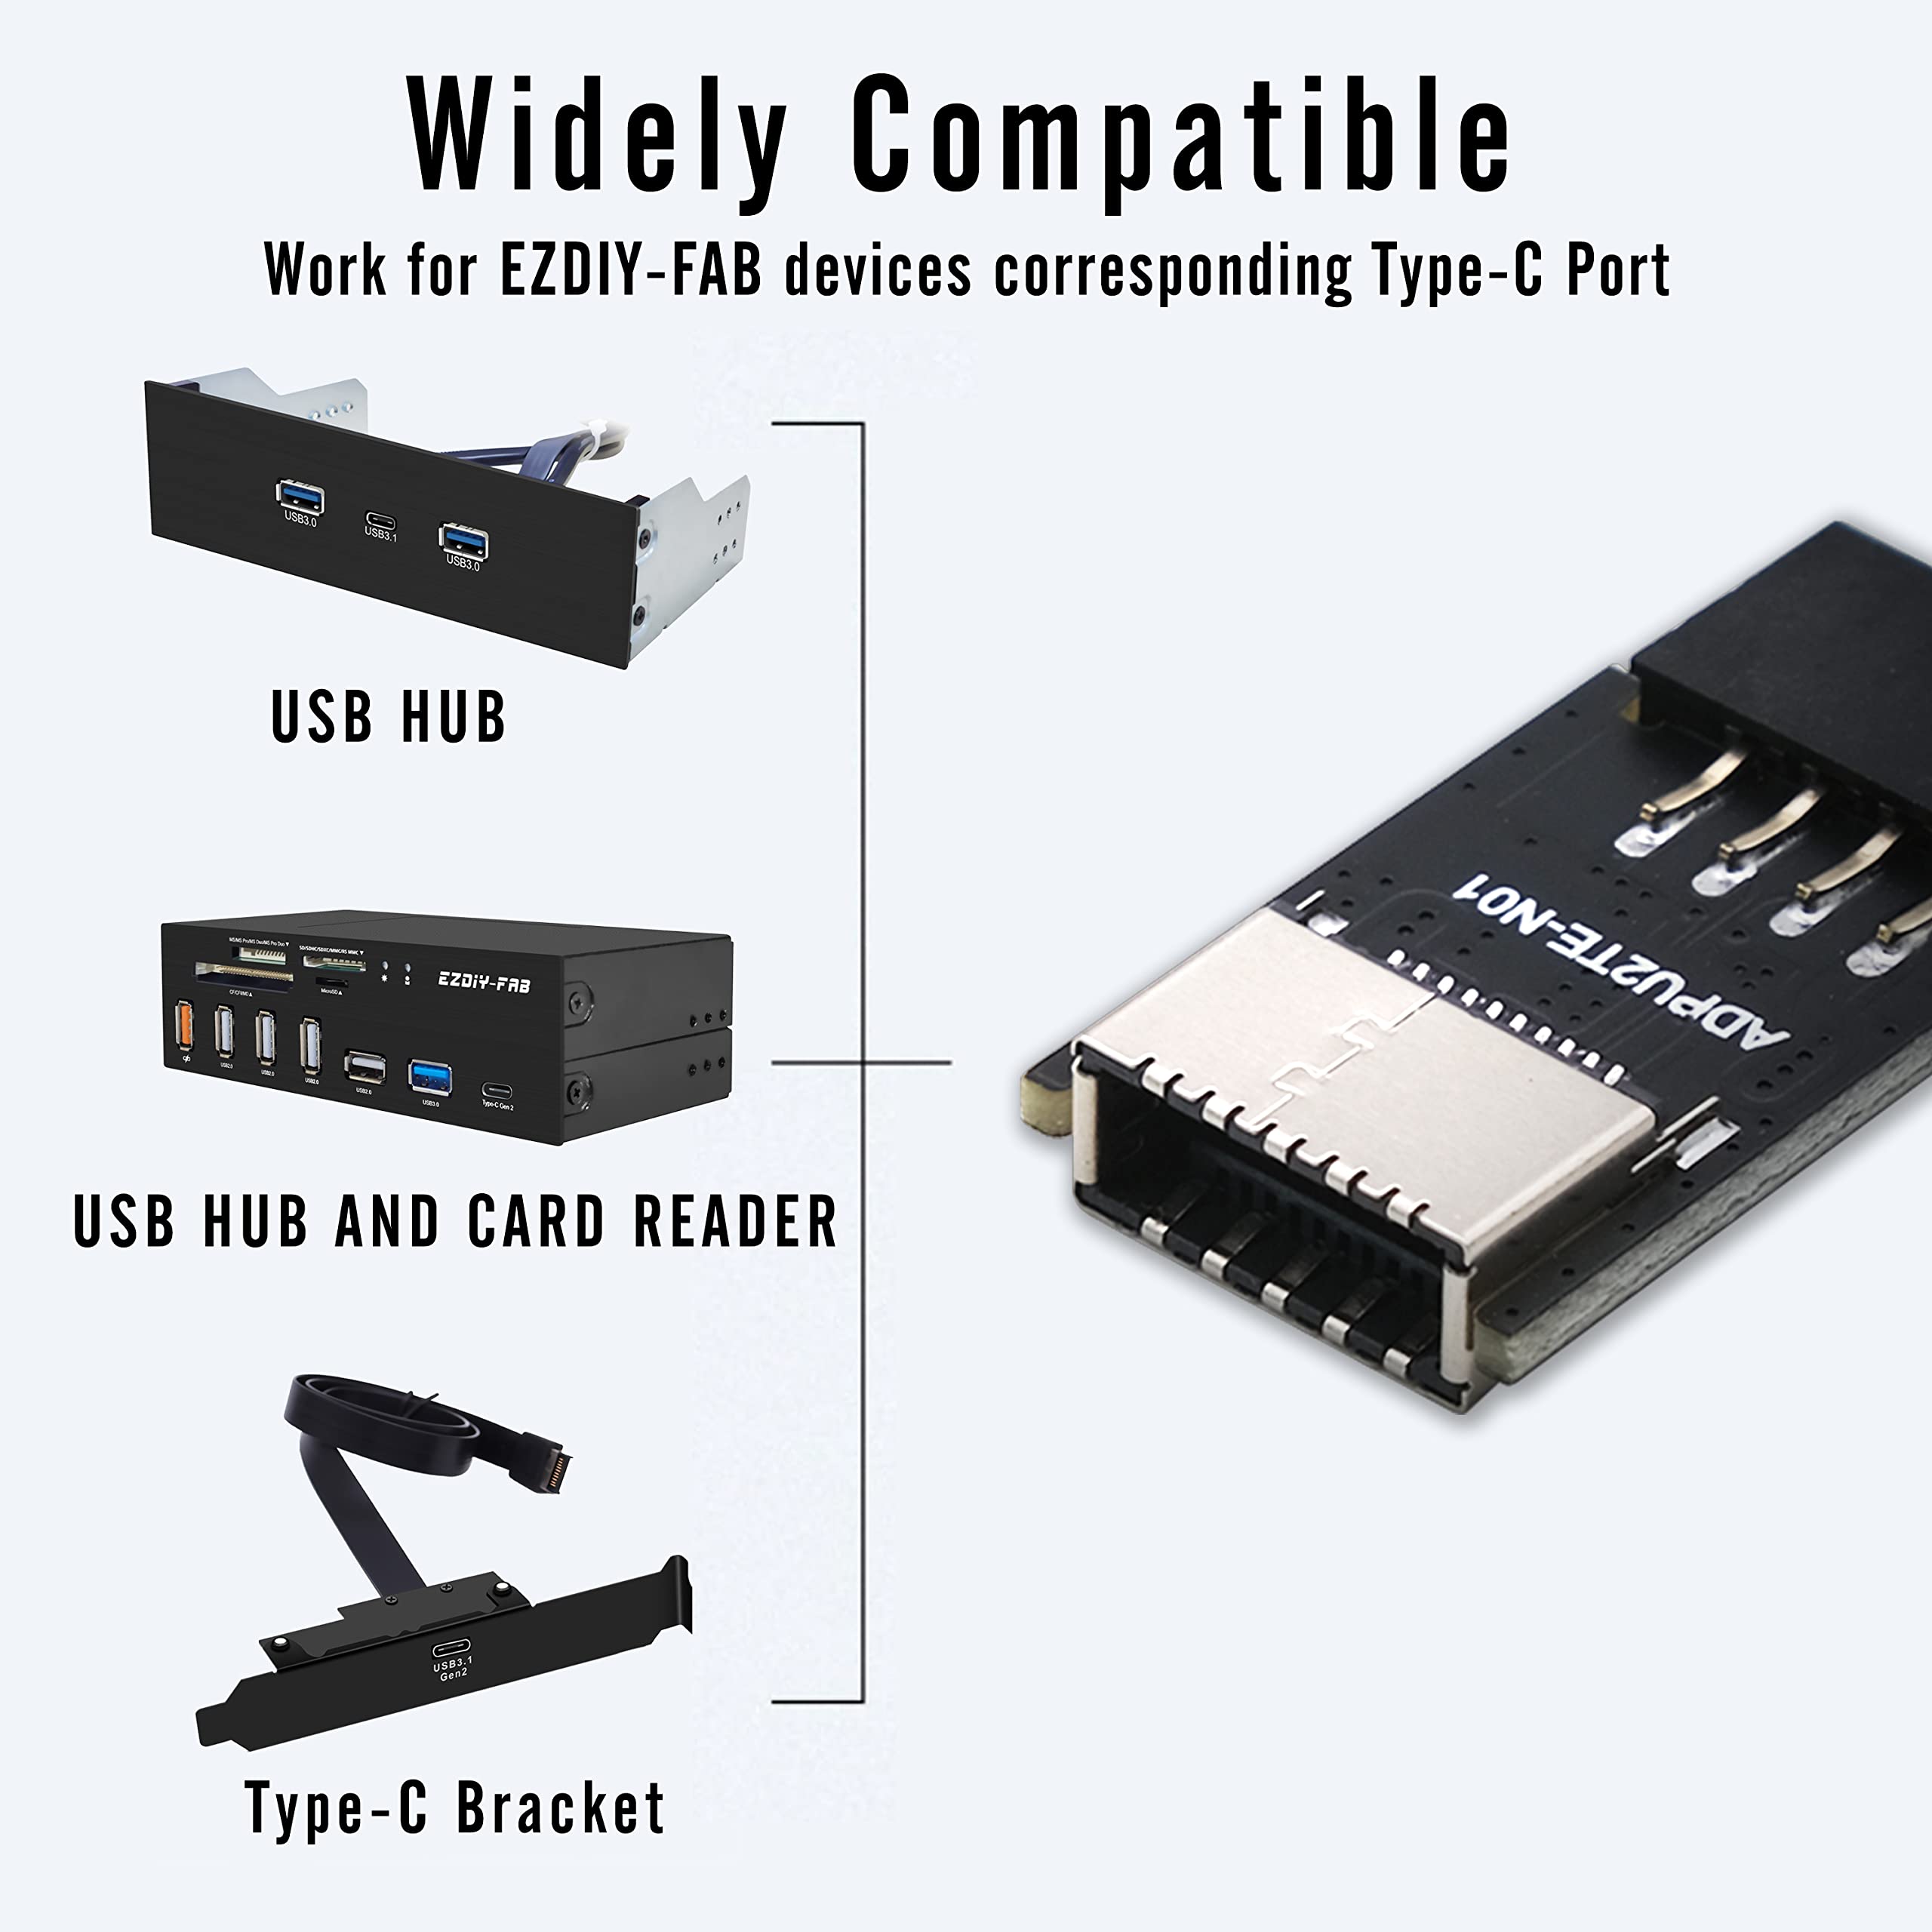 EZDIY-FAB USB 2.0 Internal Header (9-Pin) to USB 3.1/3.2 Type-C (20-Pin) A-Key Front Panel 180 Degrees Adapter, Extend USB Type E Ports to PCs Front Panel USB Ports